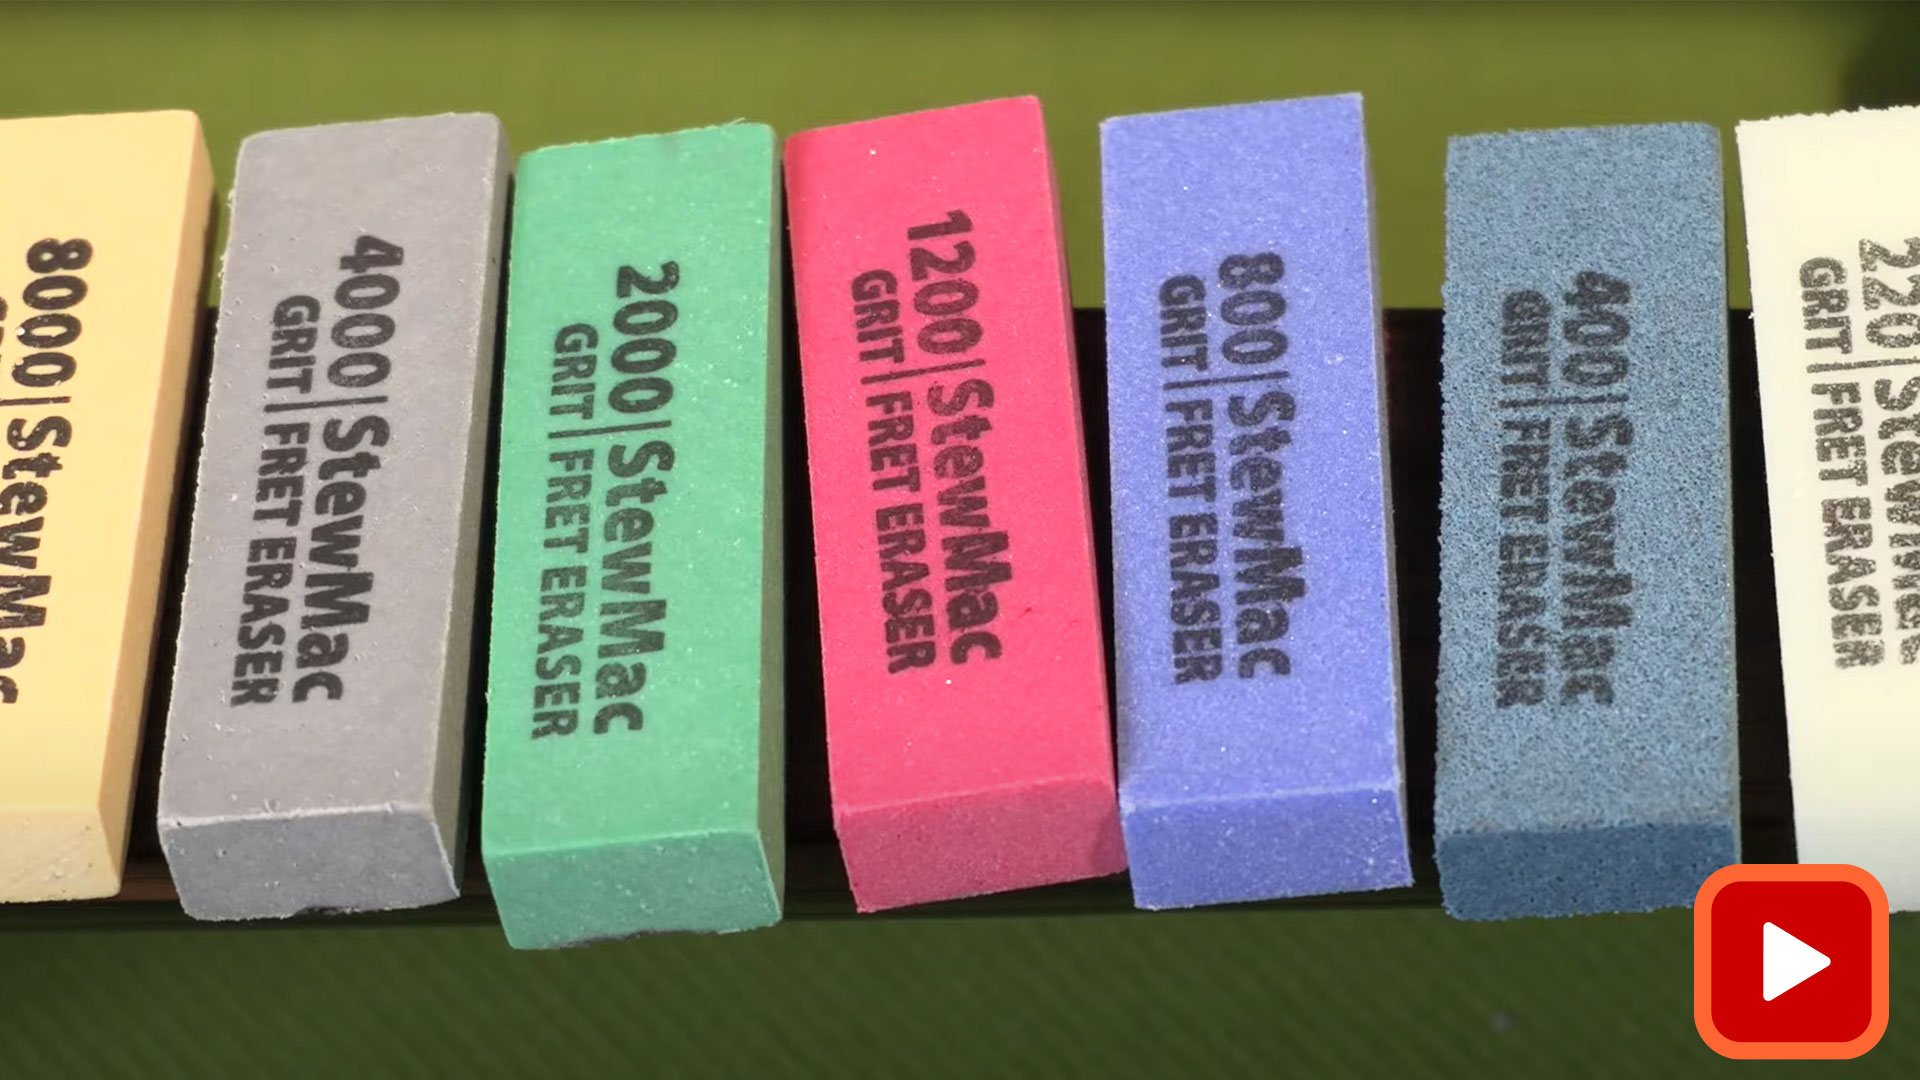 Fret Erasers lined up showing different grits and colors